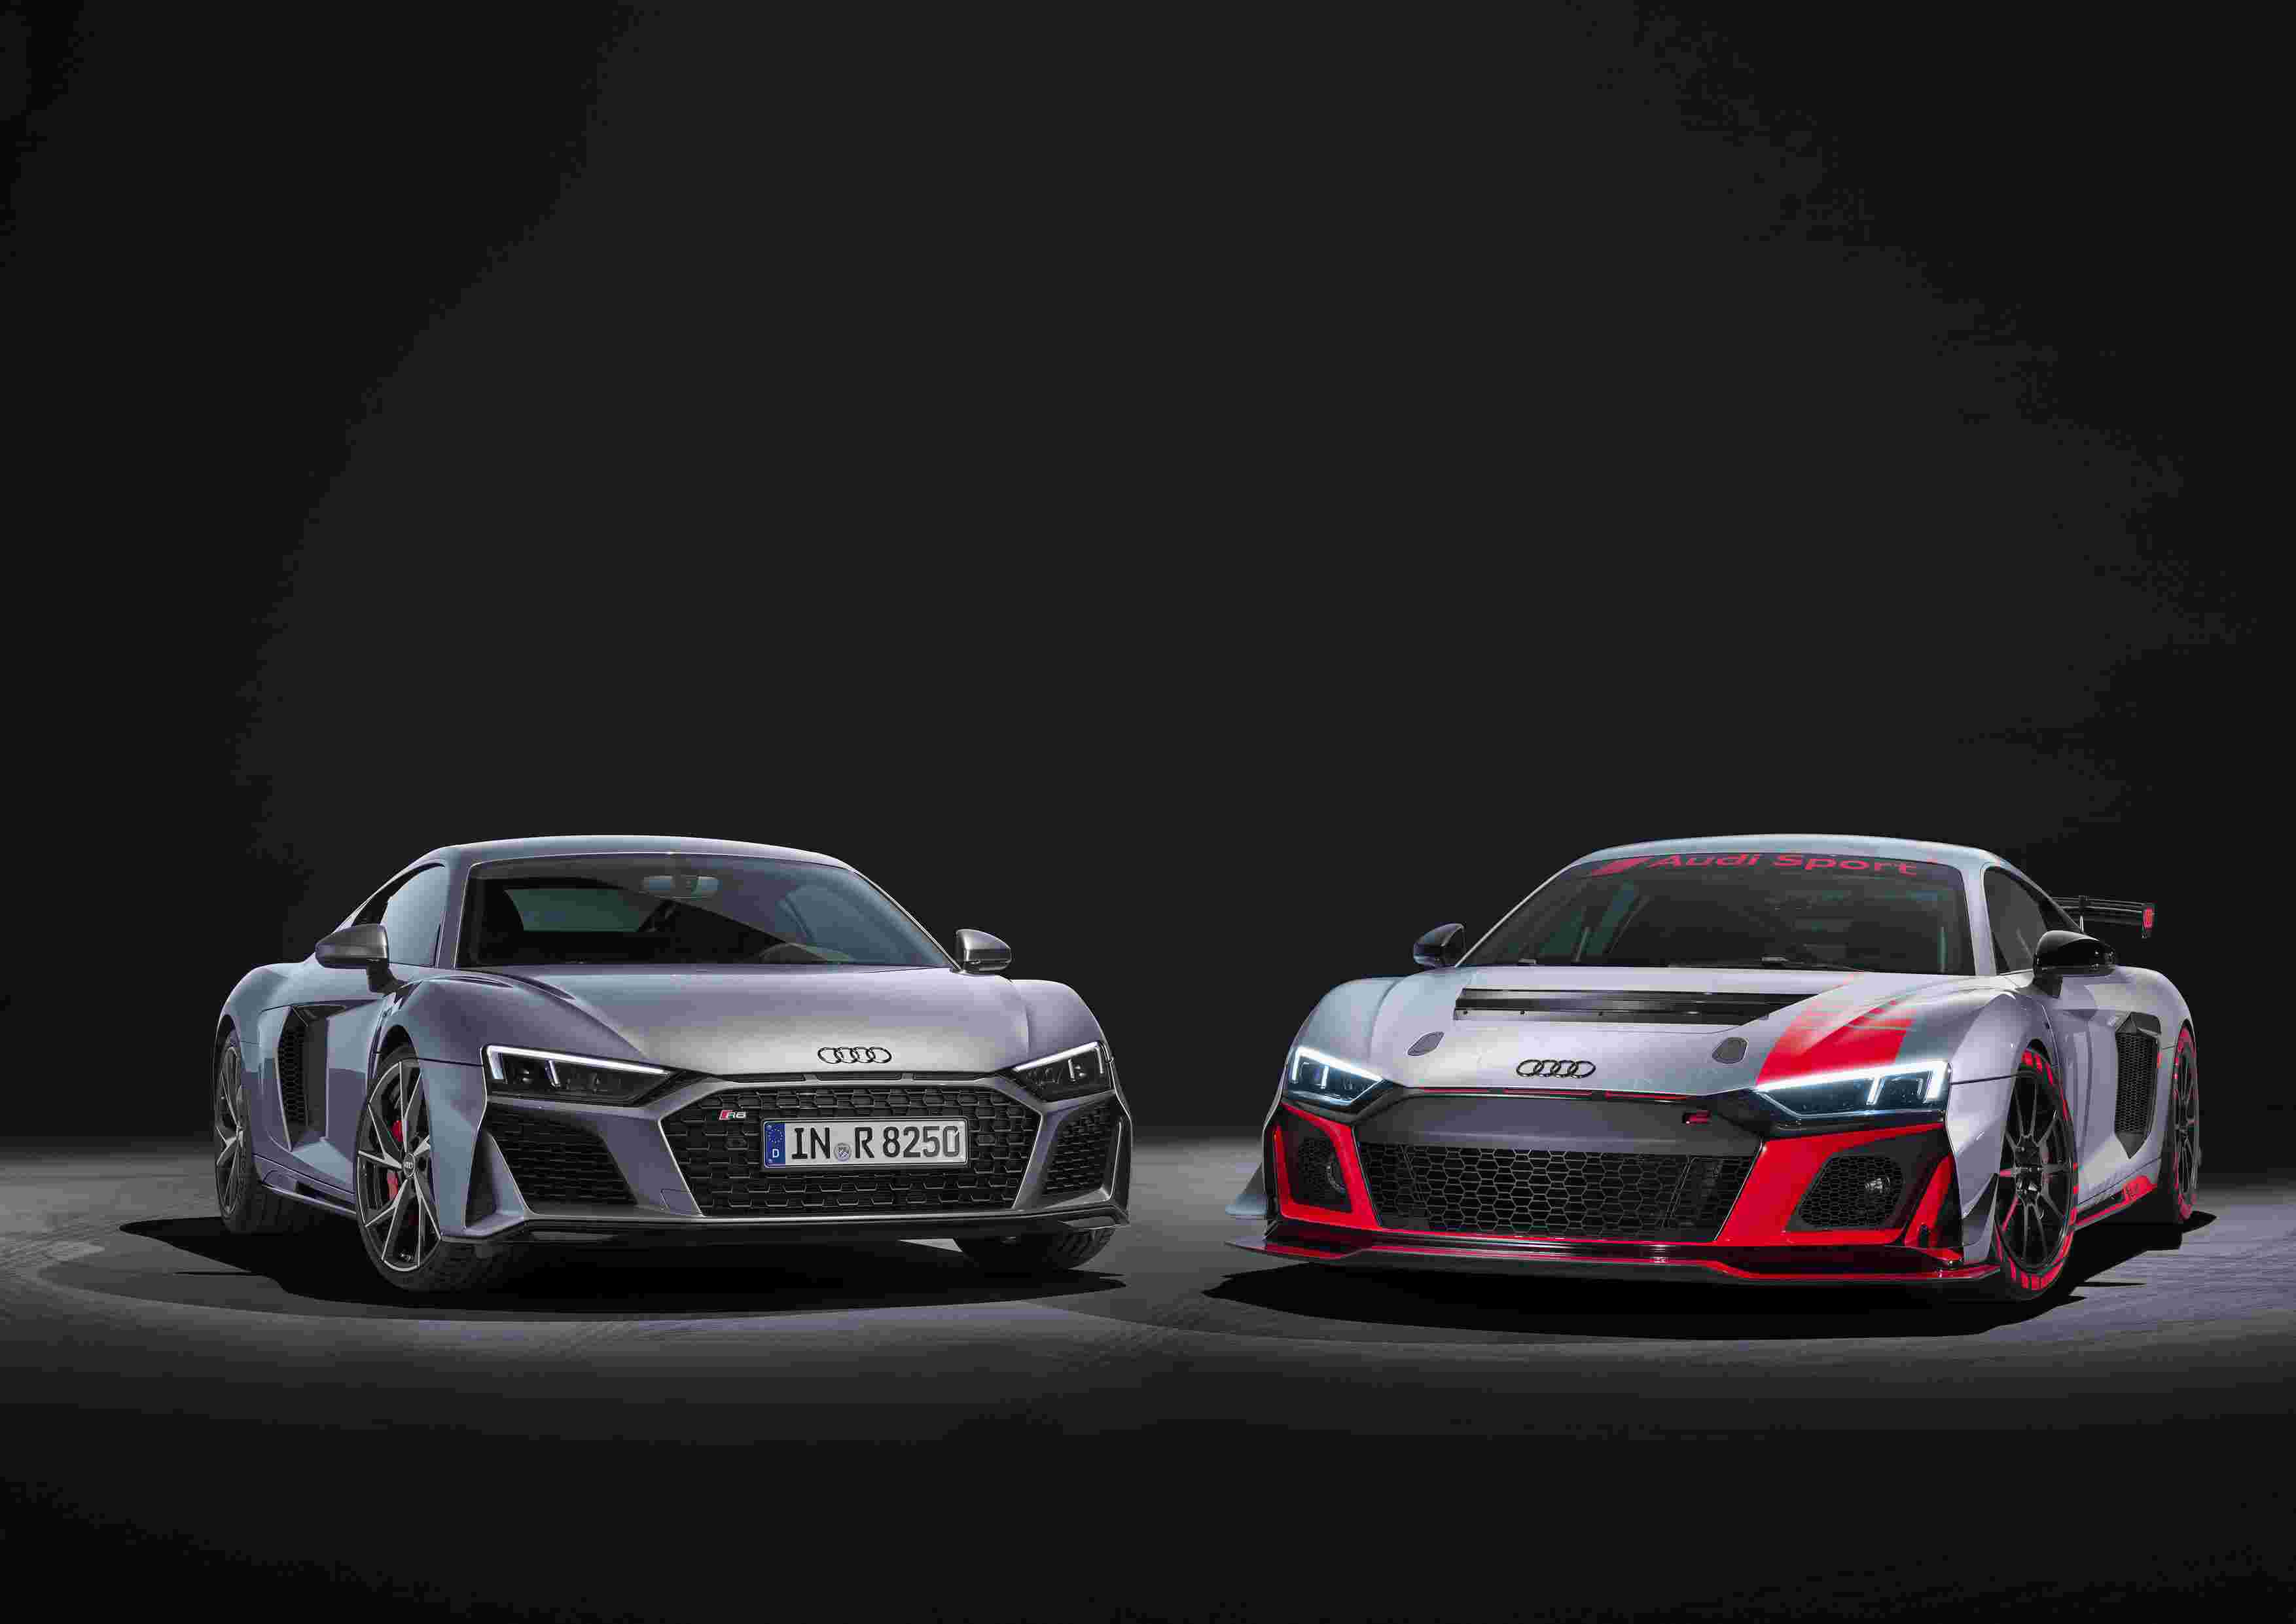 Audi R8 V10 RWD and the Audi R8 LMS GT4